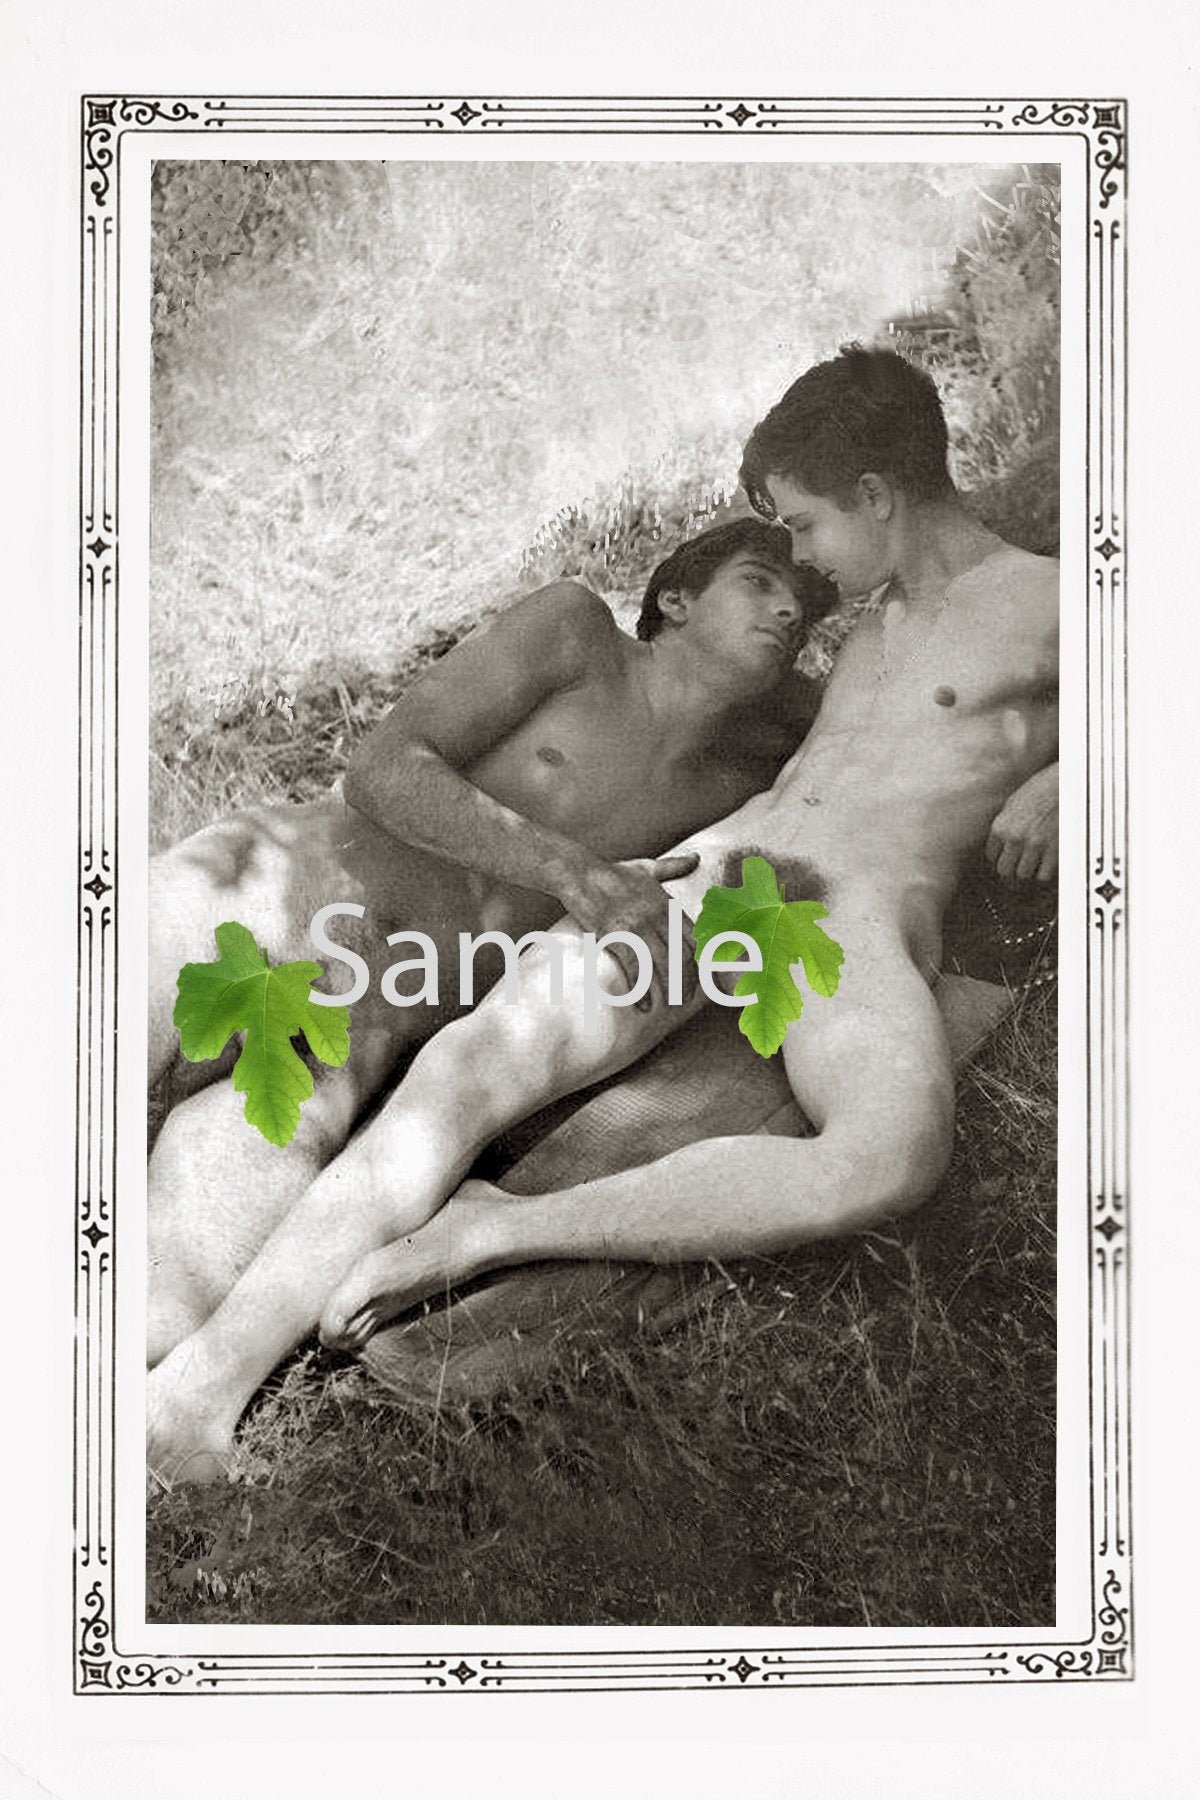 Vintage 1920s Photo Reprint of Two Nude Gay Men Sharing an - Etsy